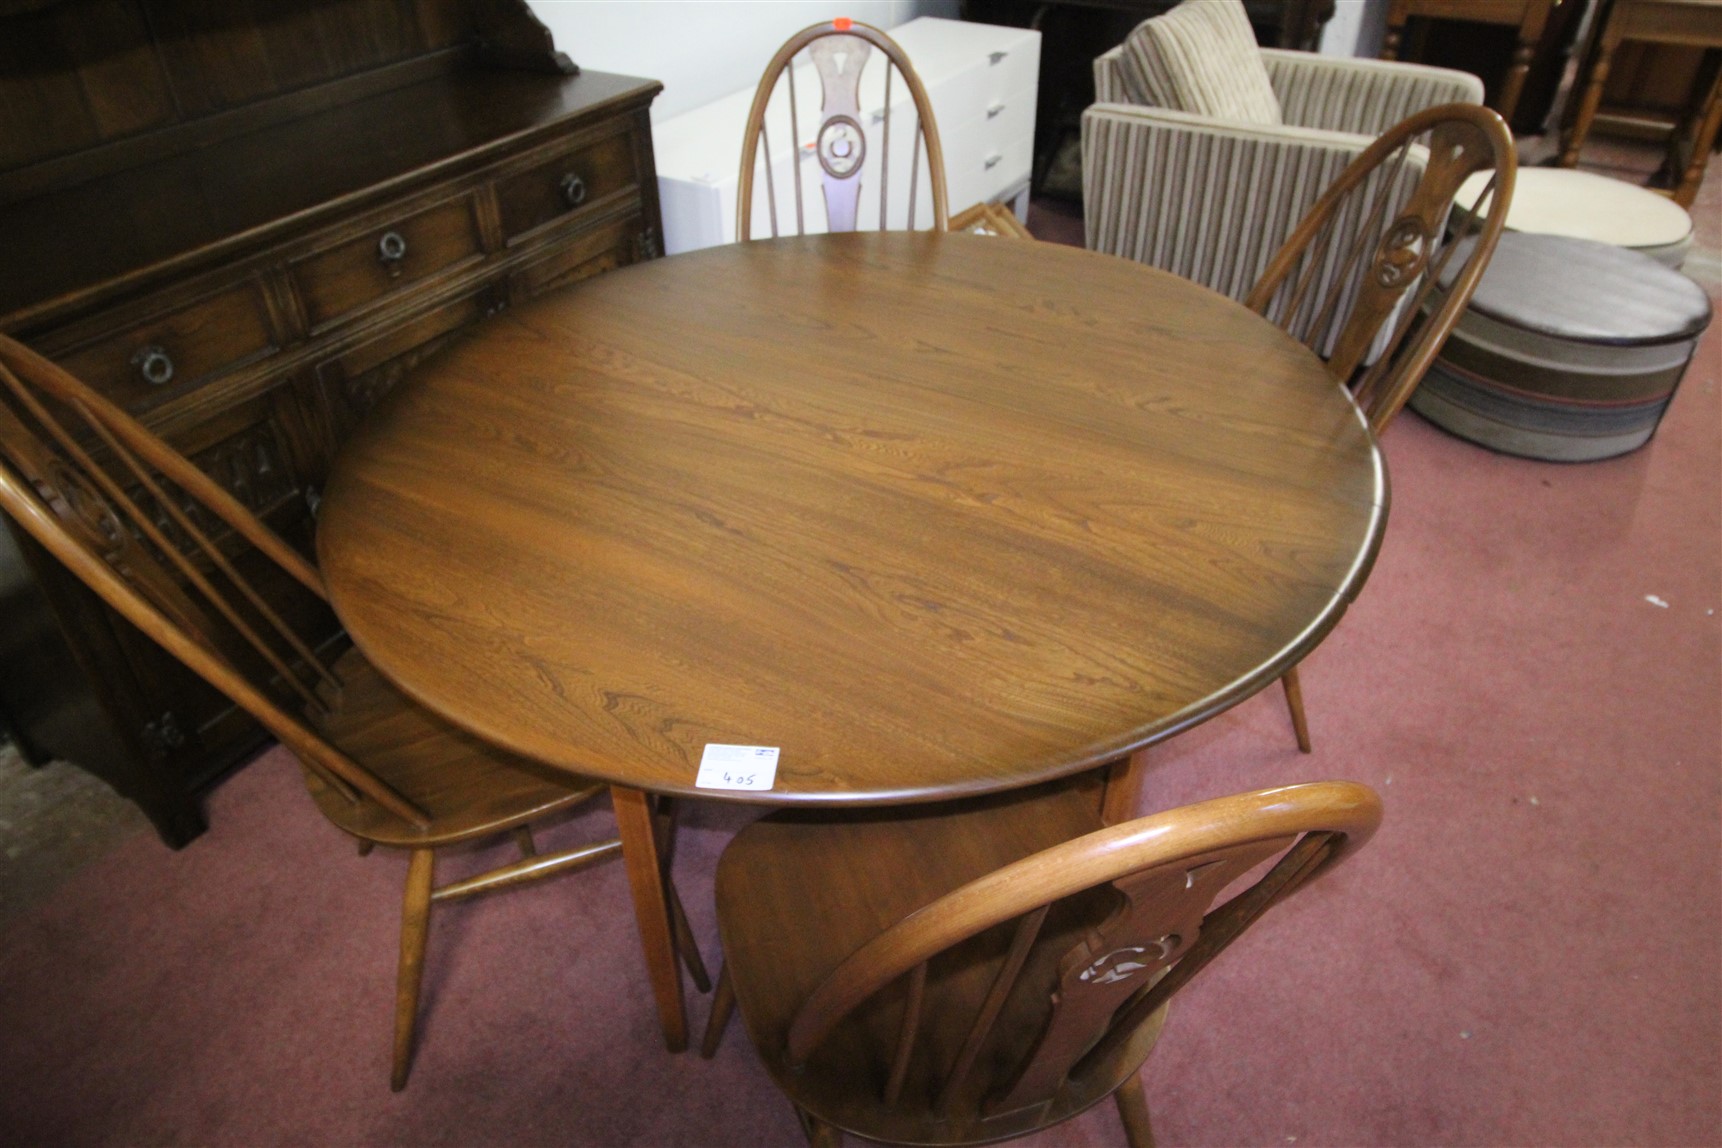 ERCOL TABLE AND CHAIRS £330